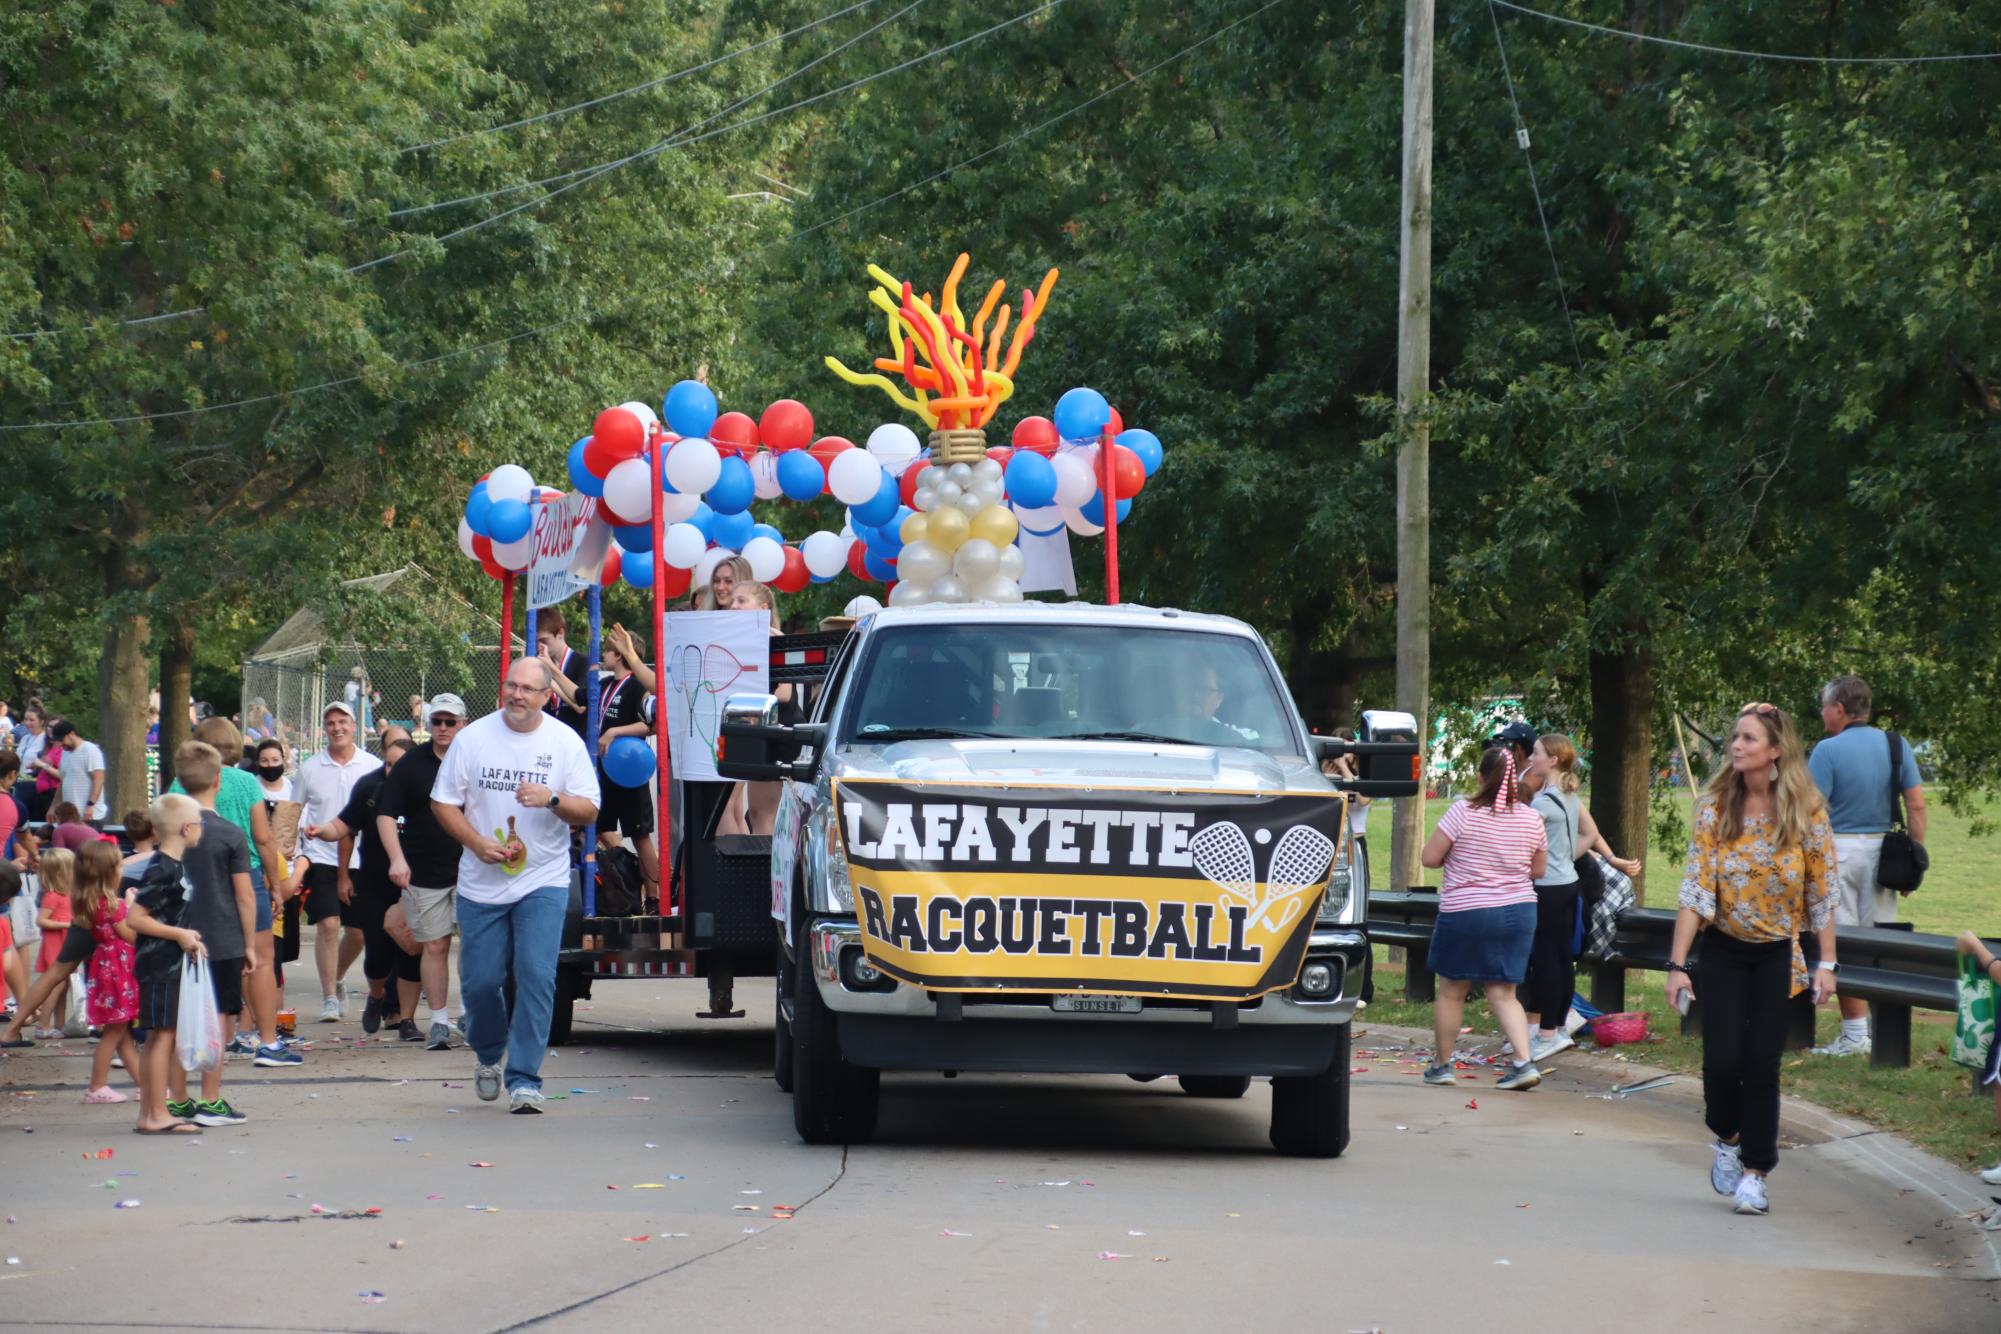 One of the traditional events of HoCo Week is the parade. Various sport teams and clubs make floats.